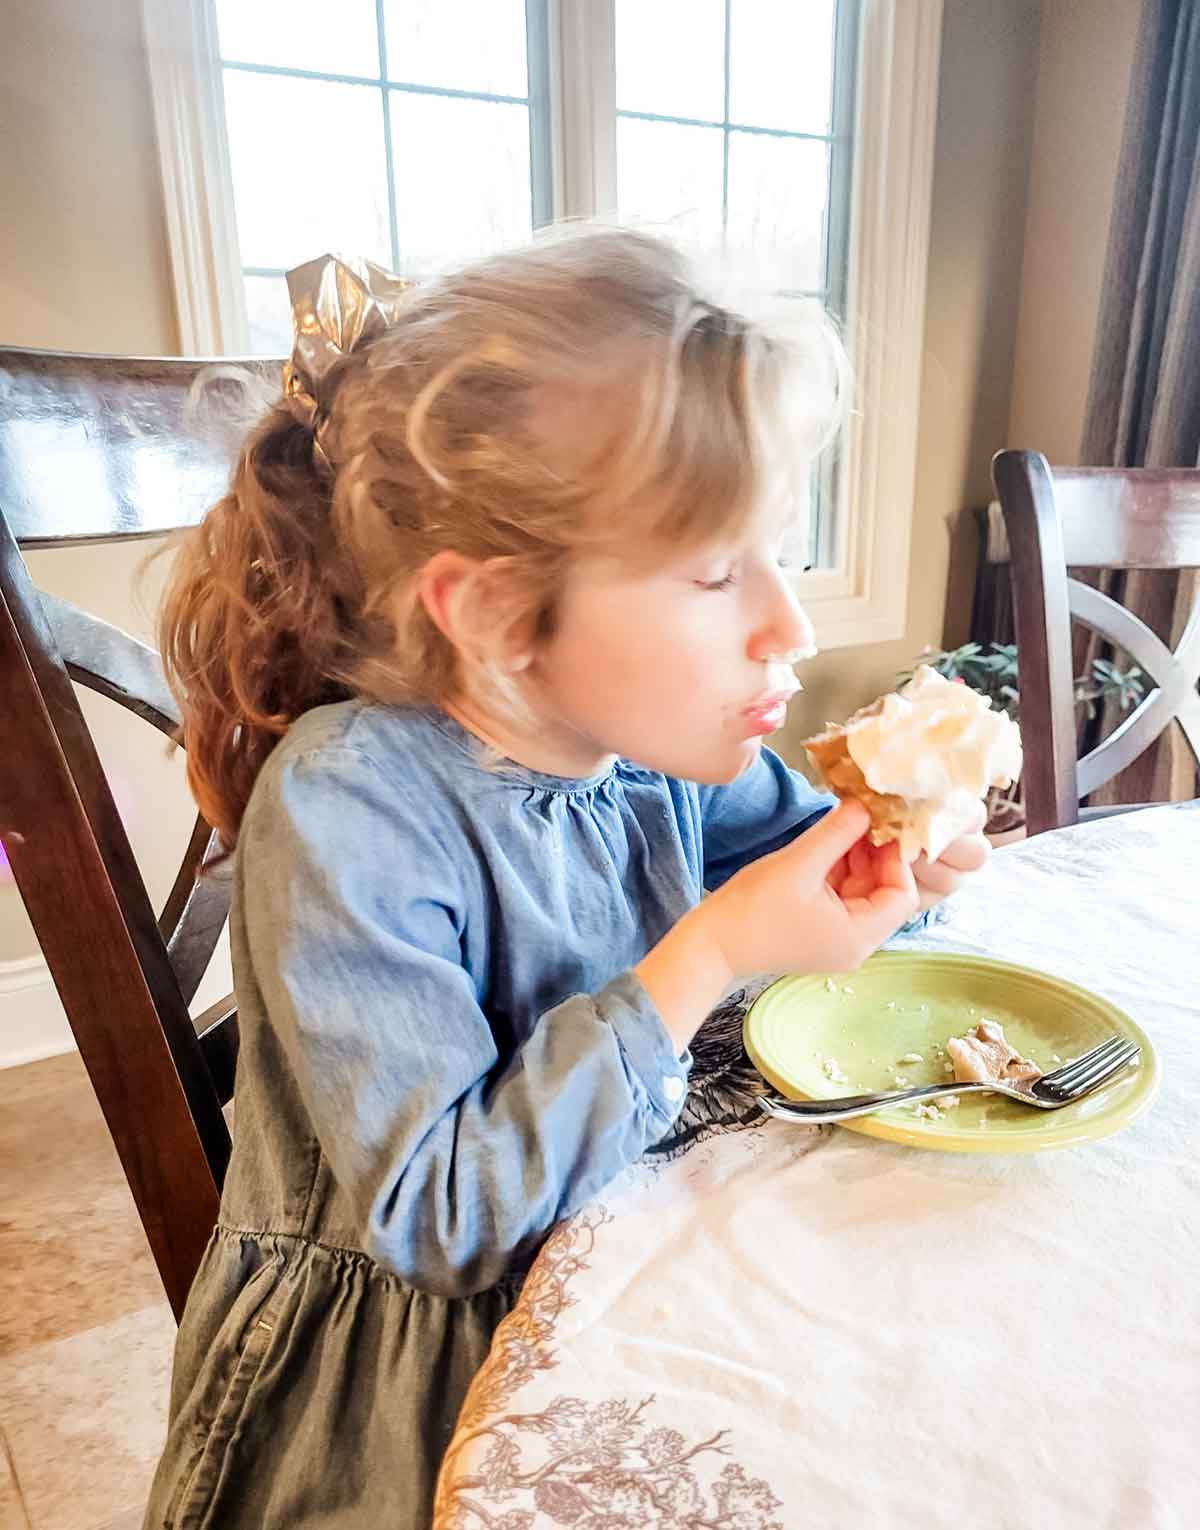 Little girl sitting at a table, holding a piece of pumpkin pie with whipped cream on her nose.